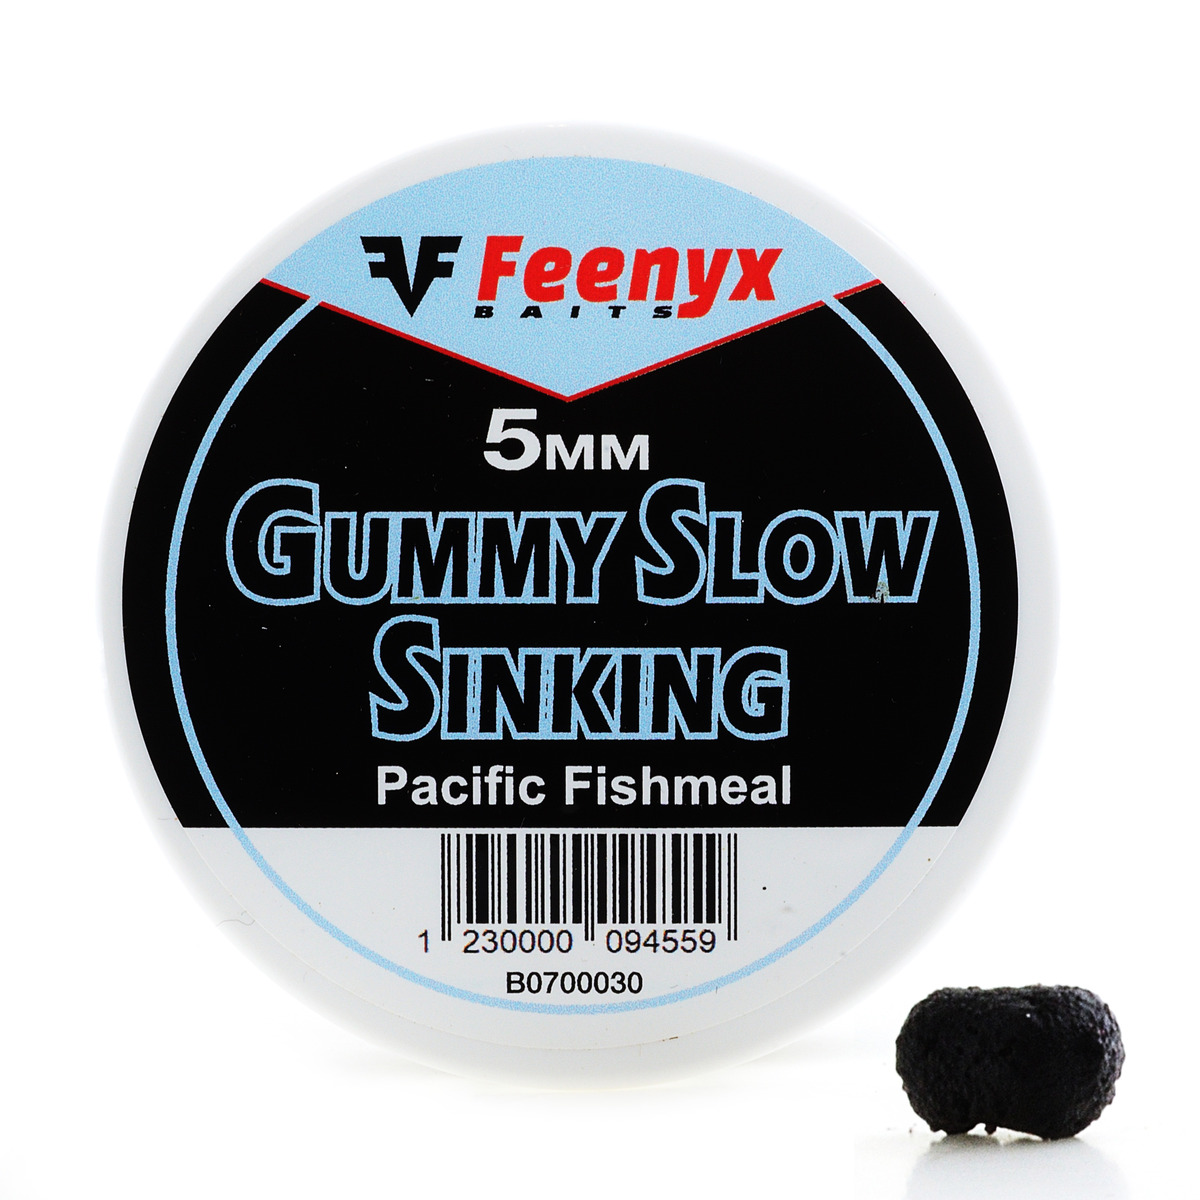 Feenyx Gummy Slow Sinking Pacific Fishmeal - 5 mm